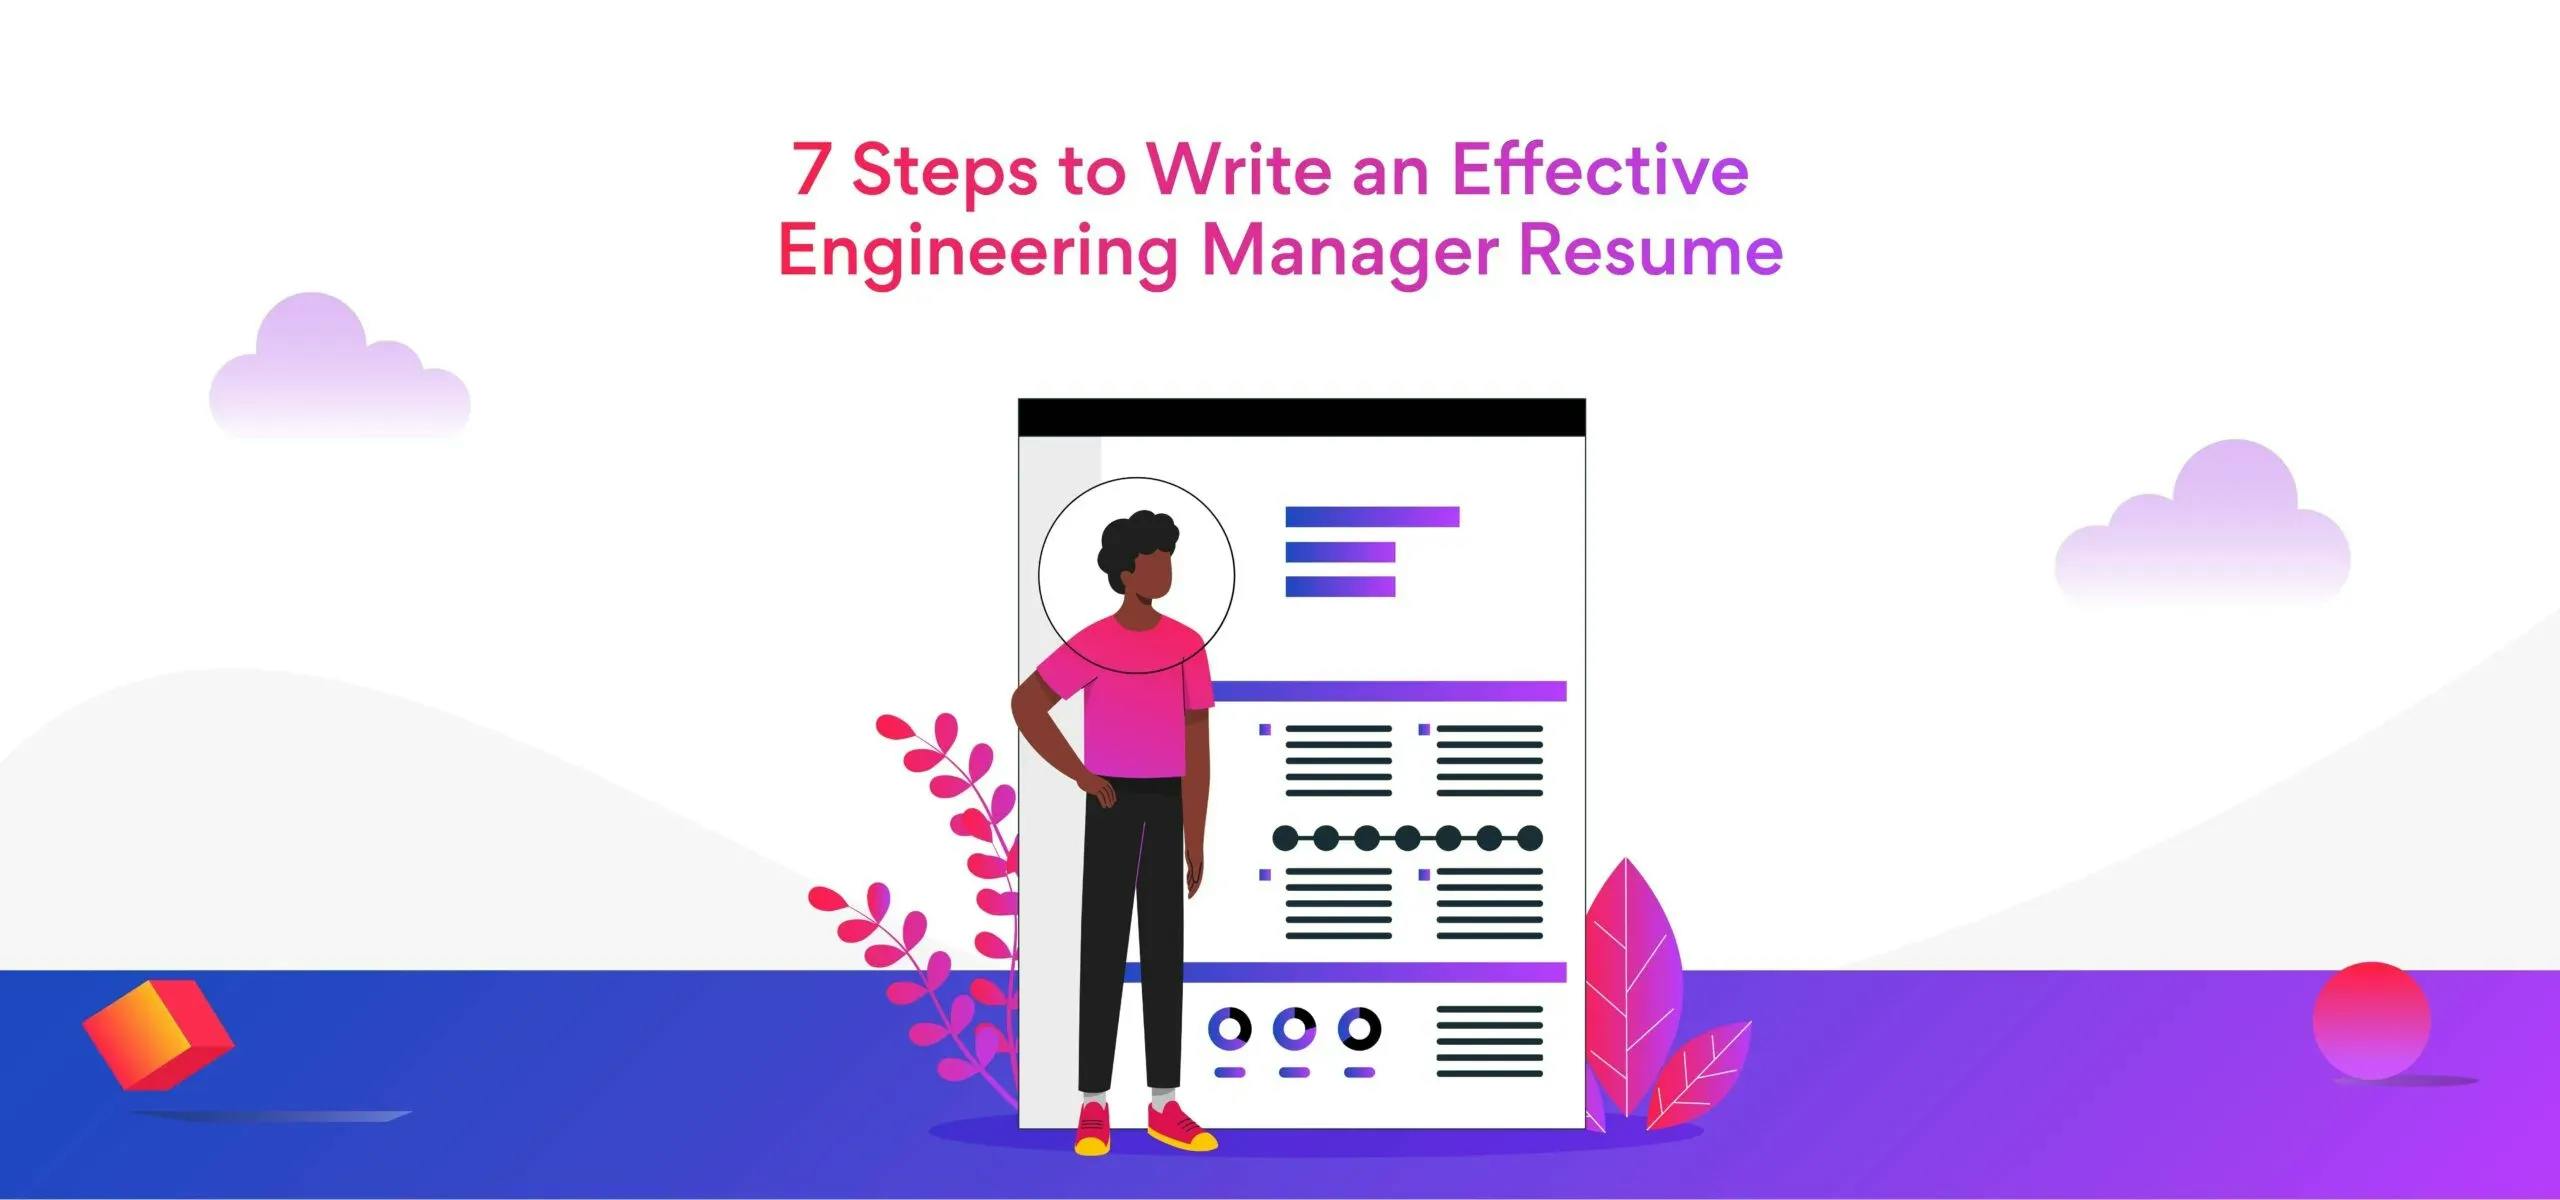 7 Steps to Write an Effective Engineering Manager Resume